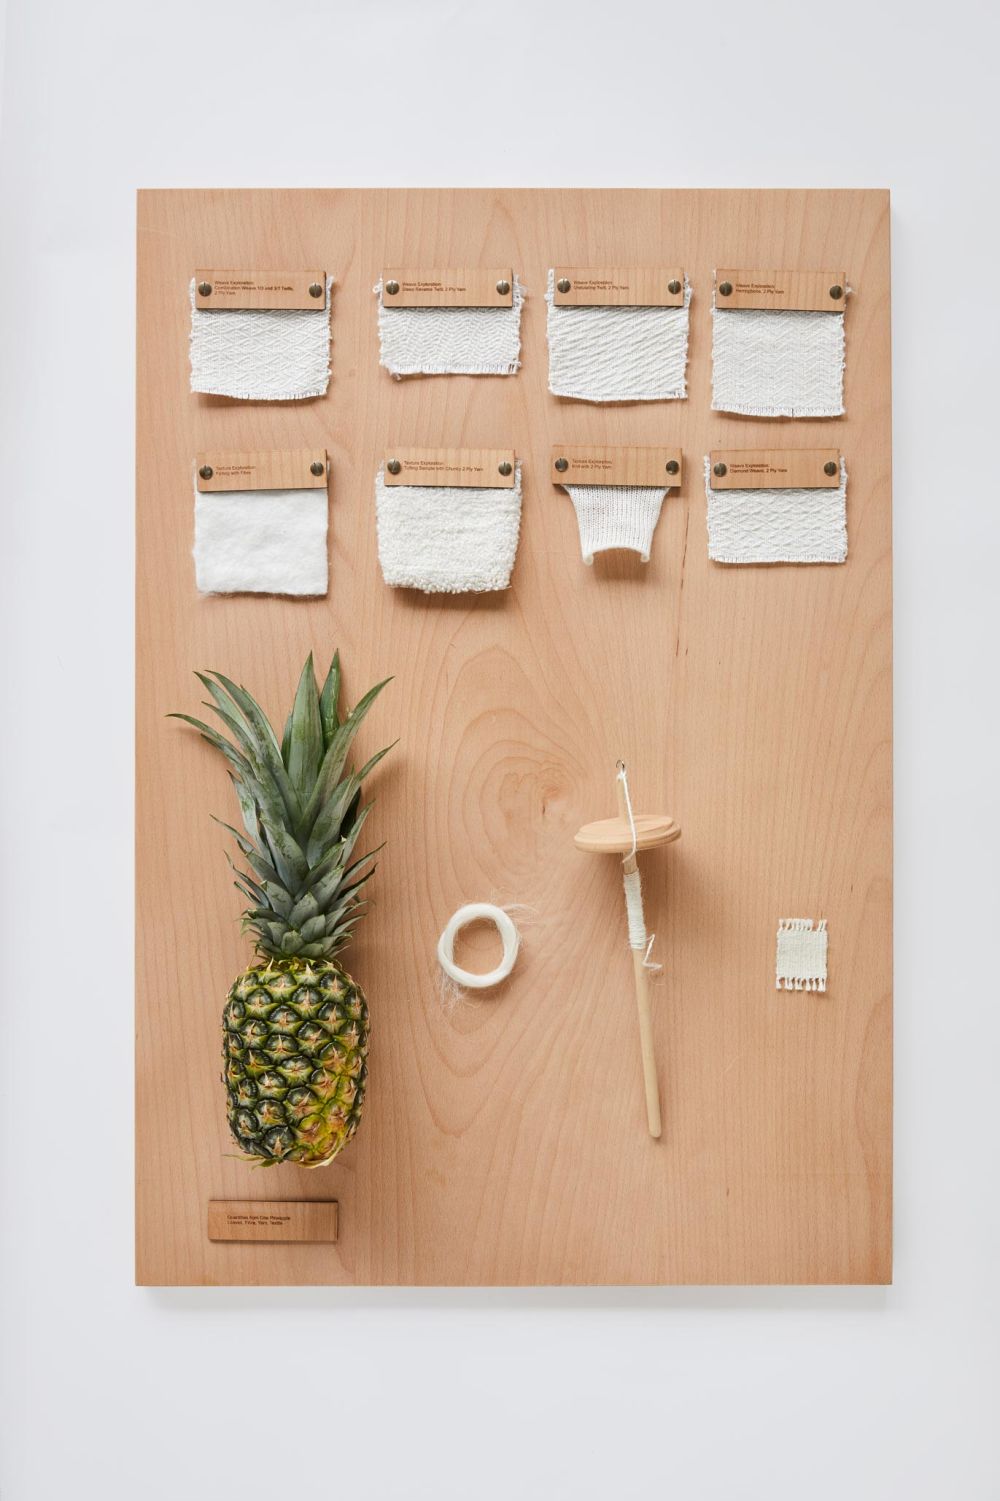 Wooden board with fabric, yarn and pineapple